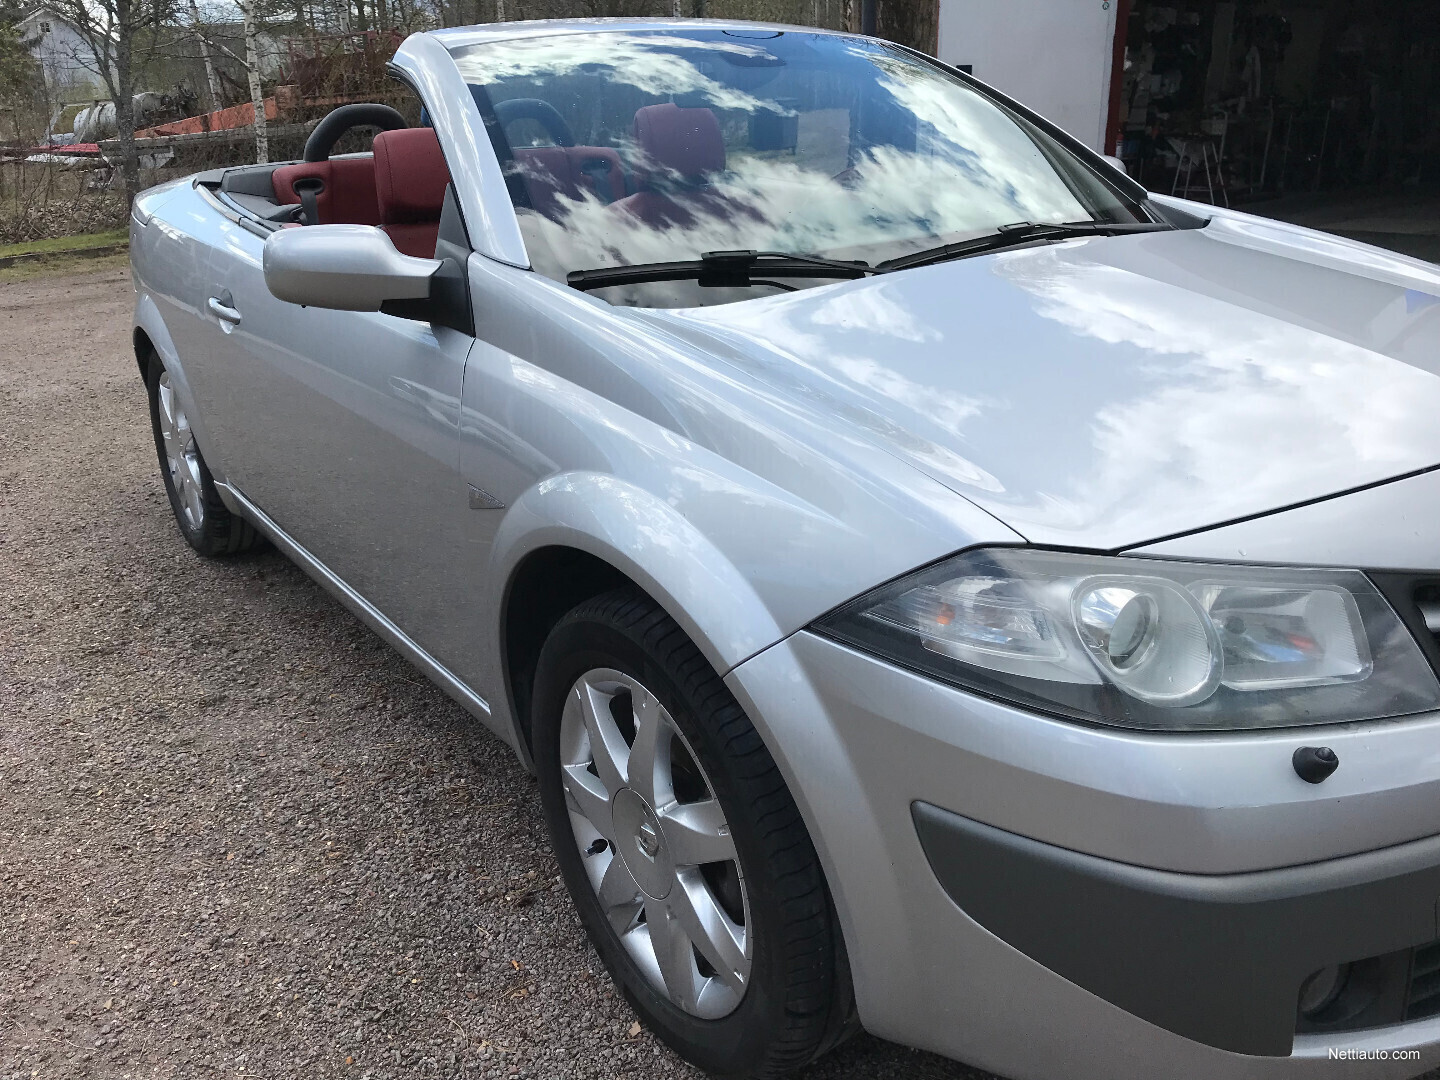 Renault Megane 2.0 16V Dynamique CoupeCab Convertible 2008 - Used